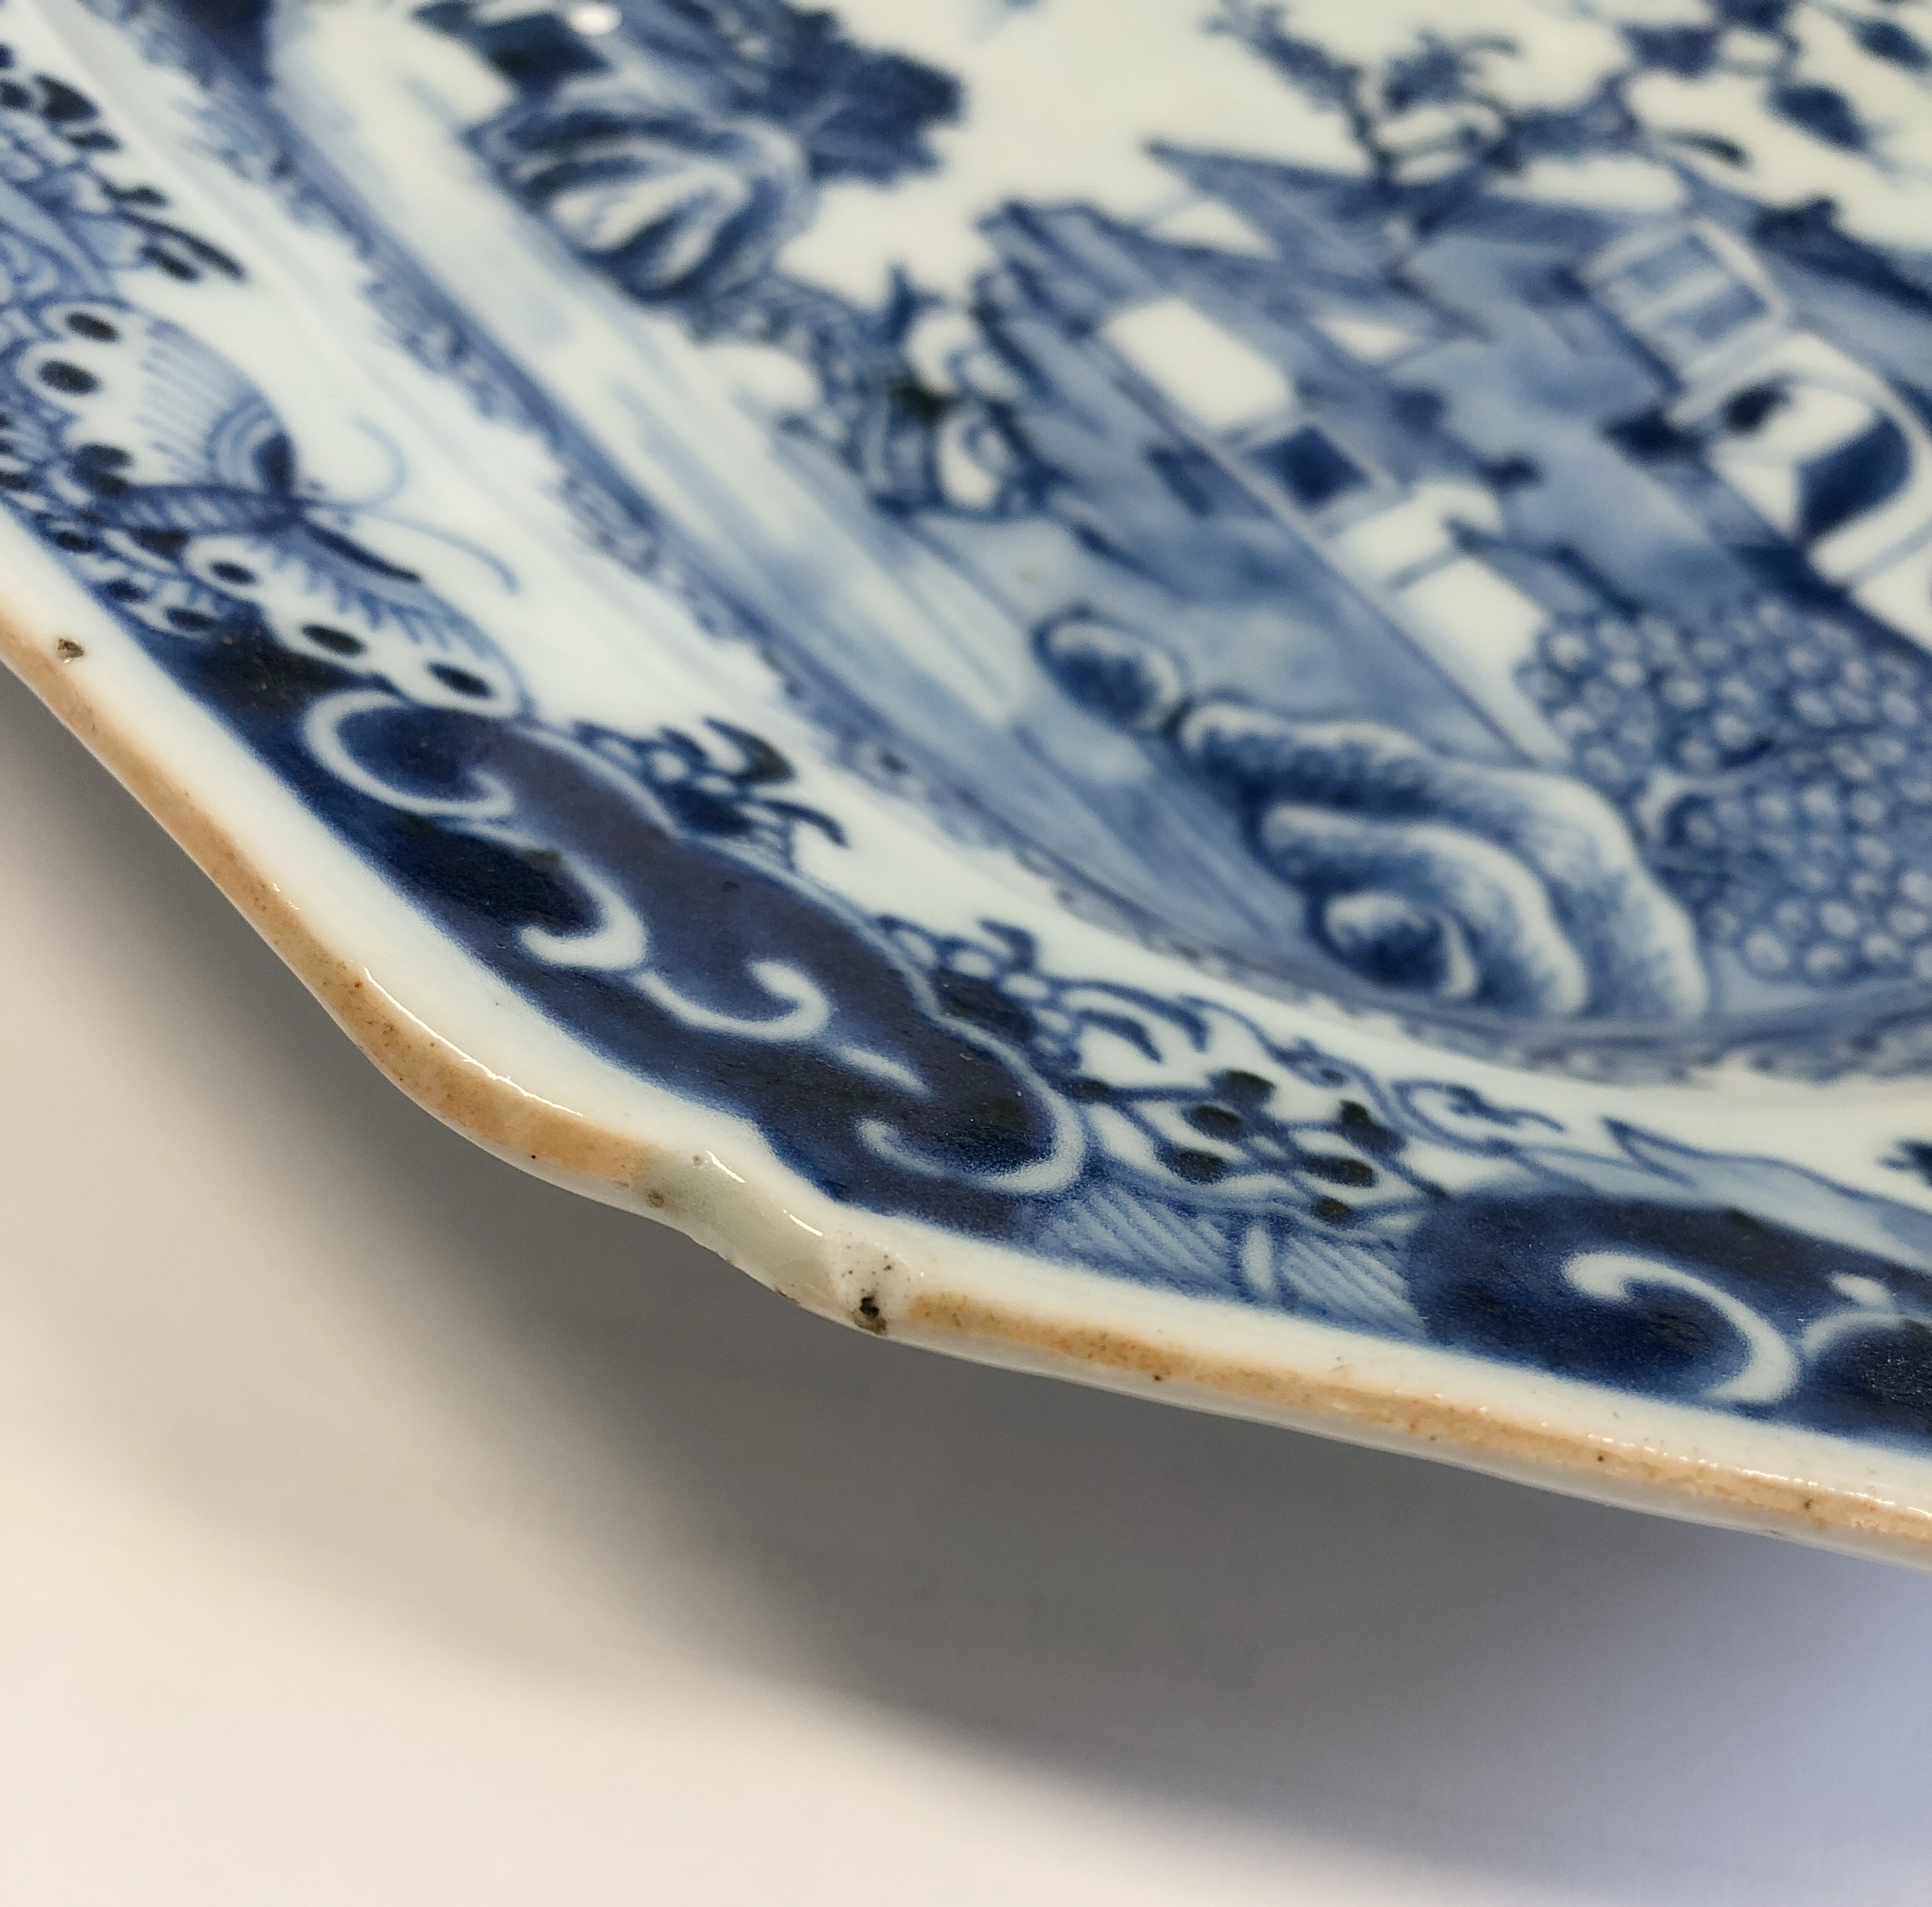 Eight Chinese export porcelain blue and white plates and octagonal platters - late 18th / early 19th - Image 18 of 31